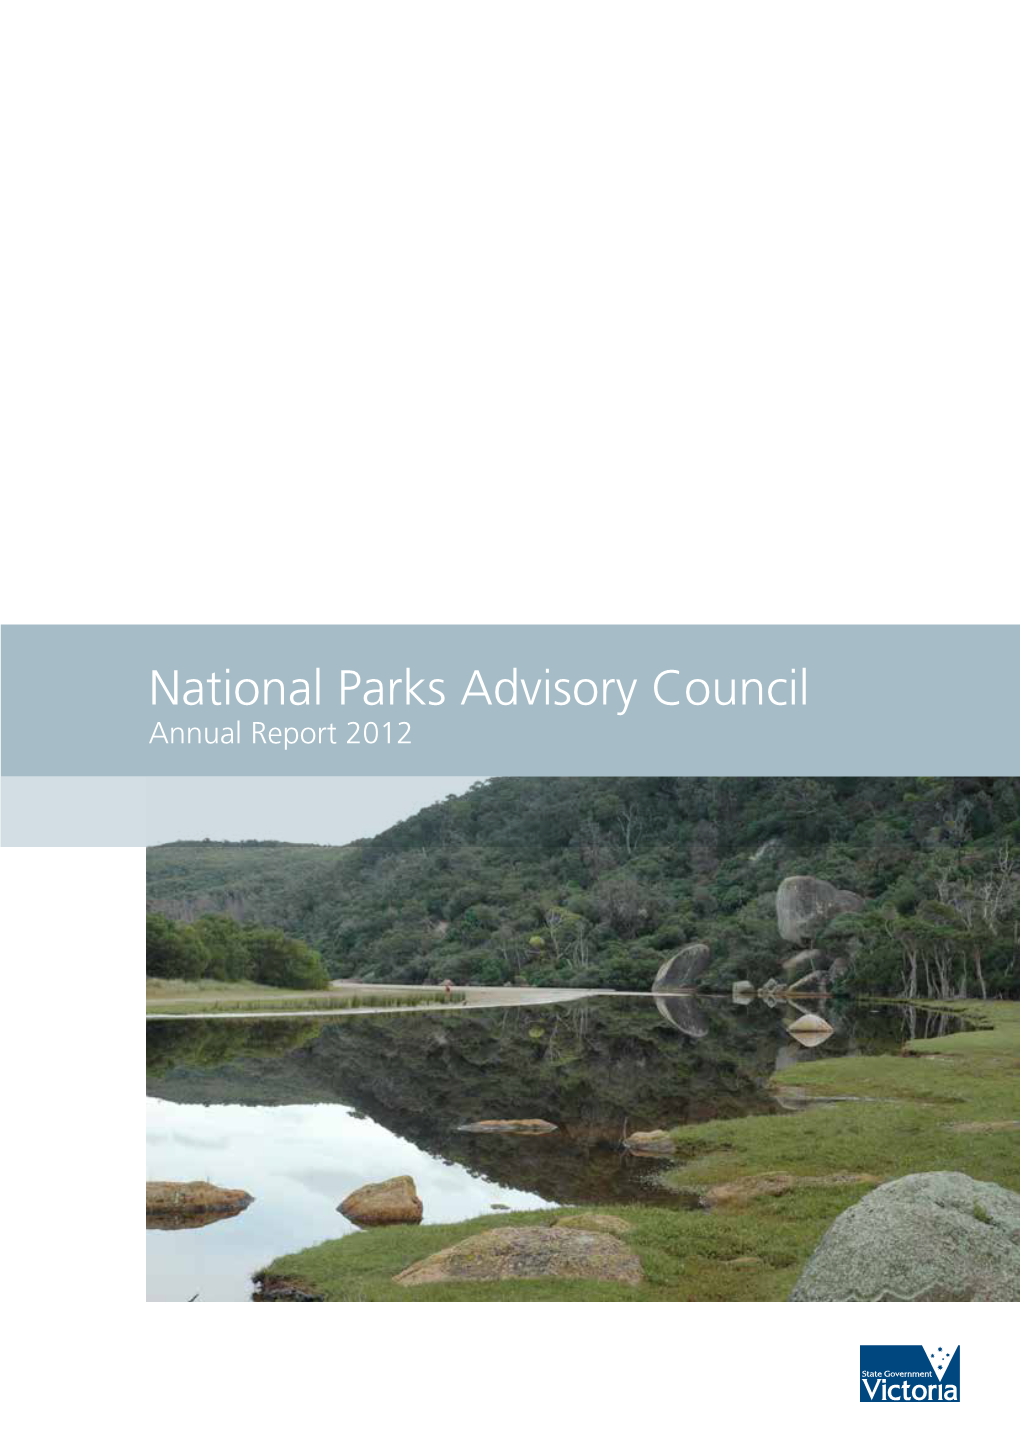 National Parks Advisory Council Annual Report 2012 Published by the Victorian Government Department of Sustainability and Environment Melbourne, September 2012